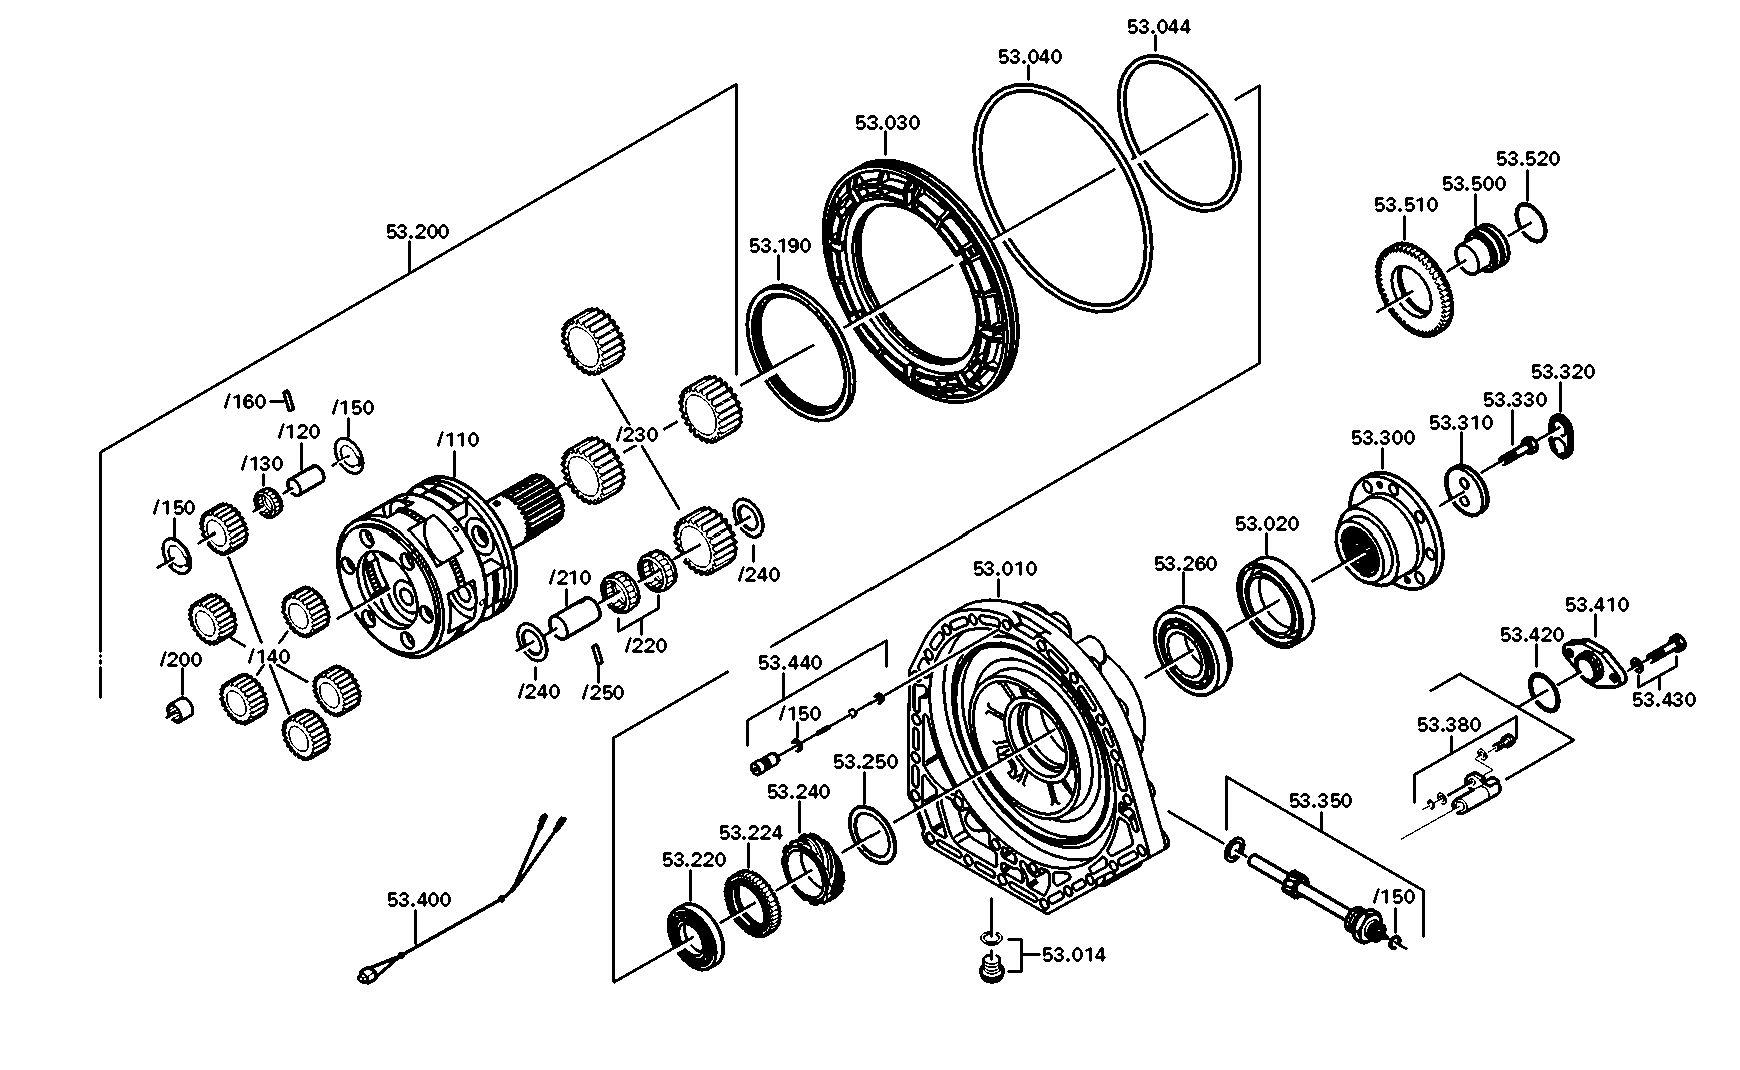 drawing for MOXY TRUCKS AS 252624 - SPRING WASHER